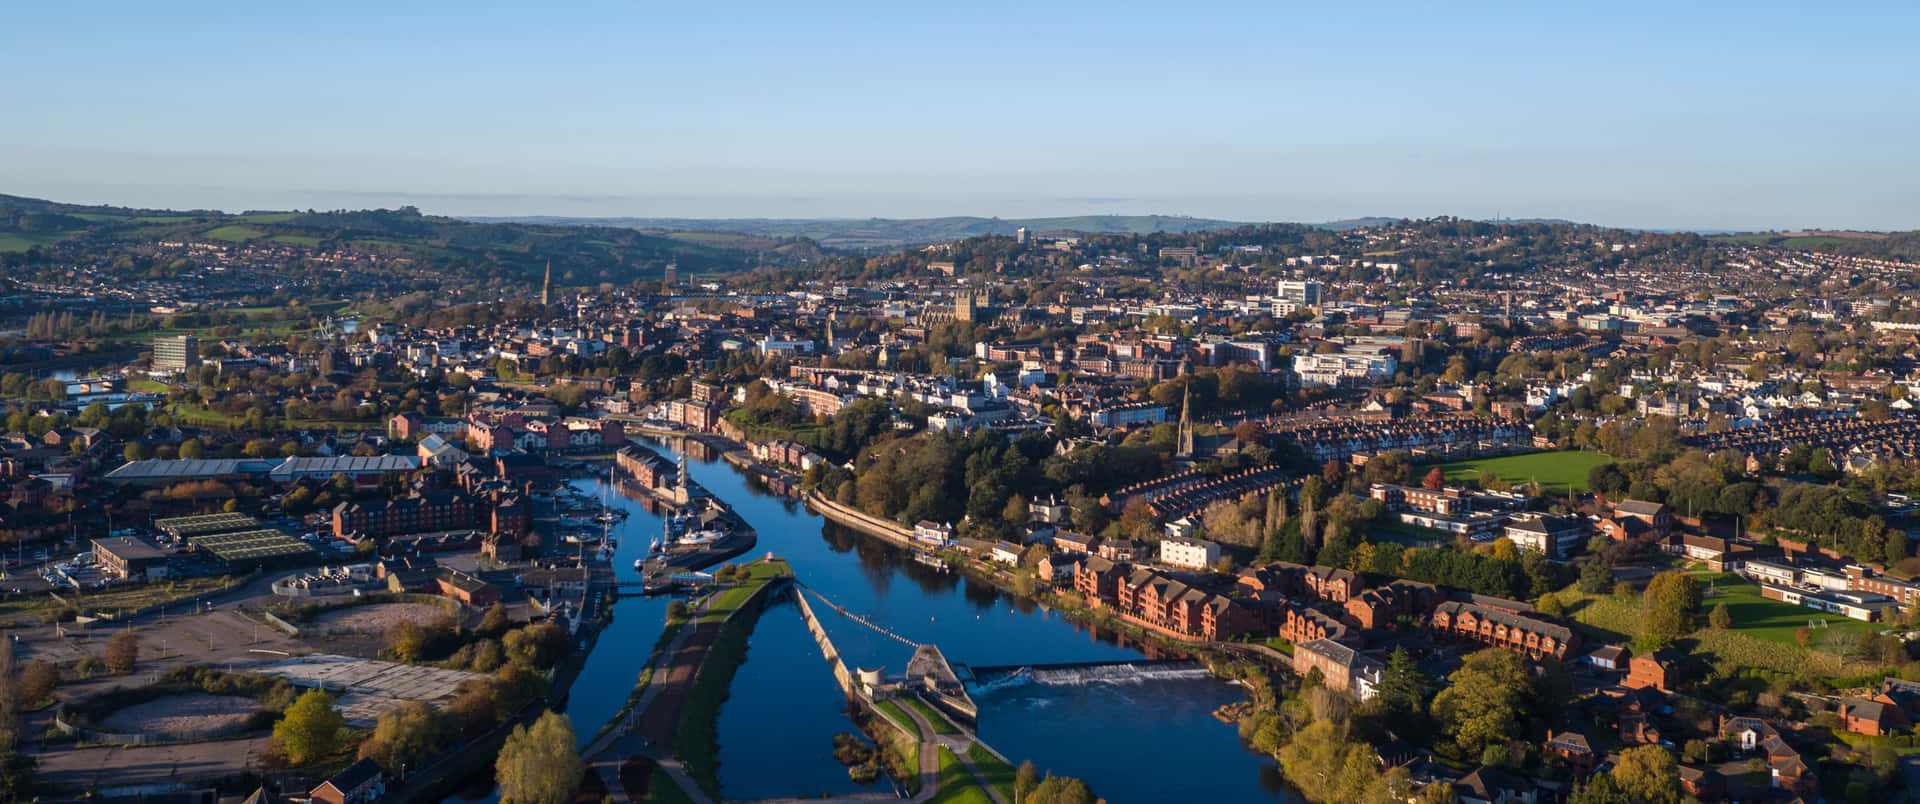 Exeter Cityscape Aerial View Wallpaper